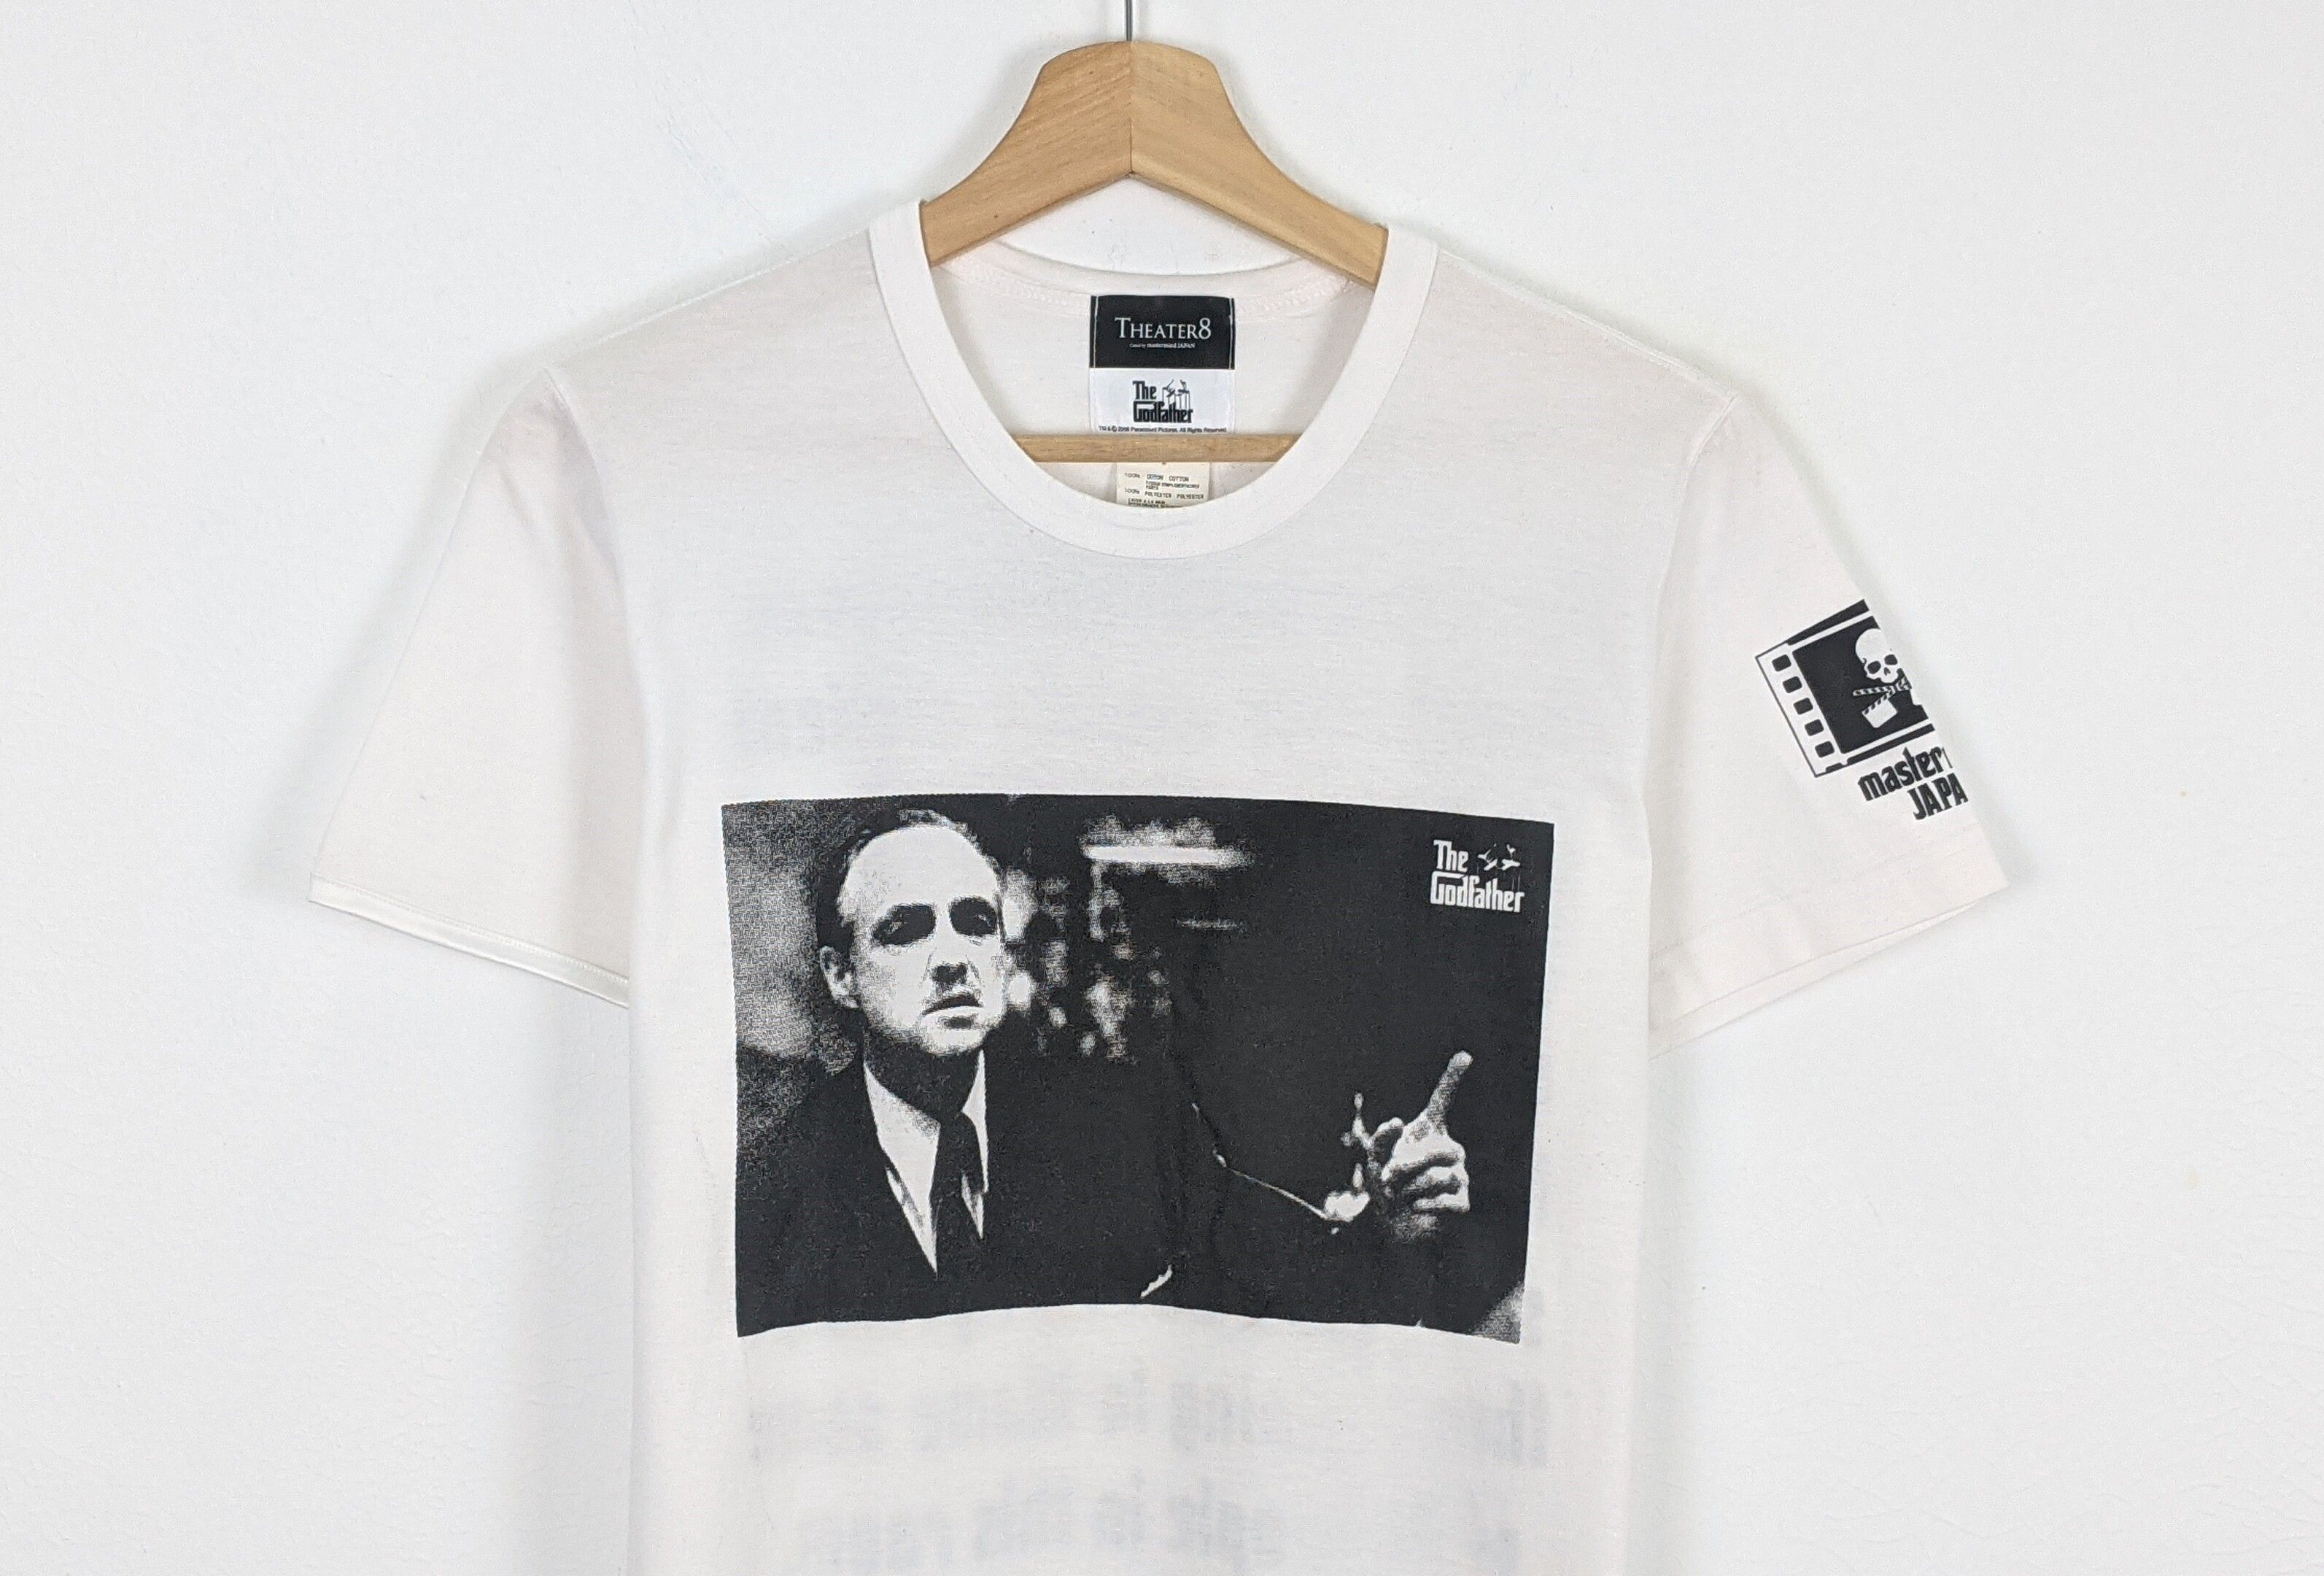 Mastermind Japan Theater 8 The Godfather shirt - 2